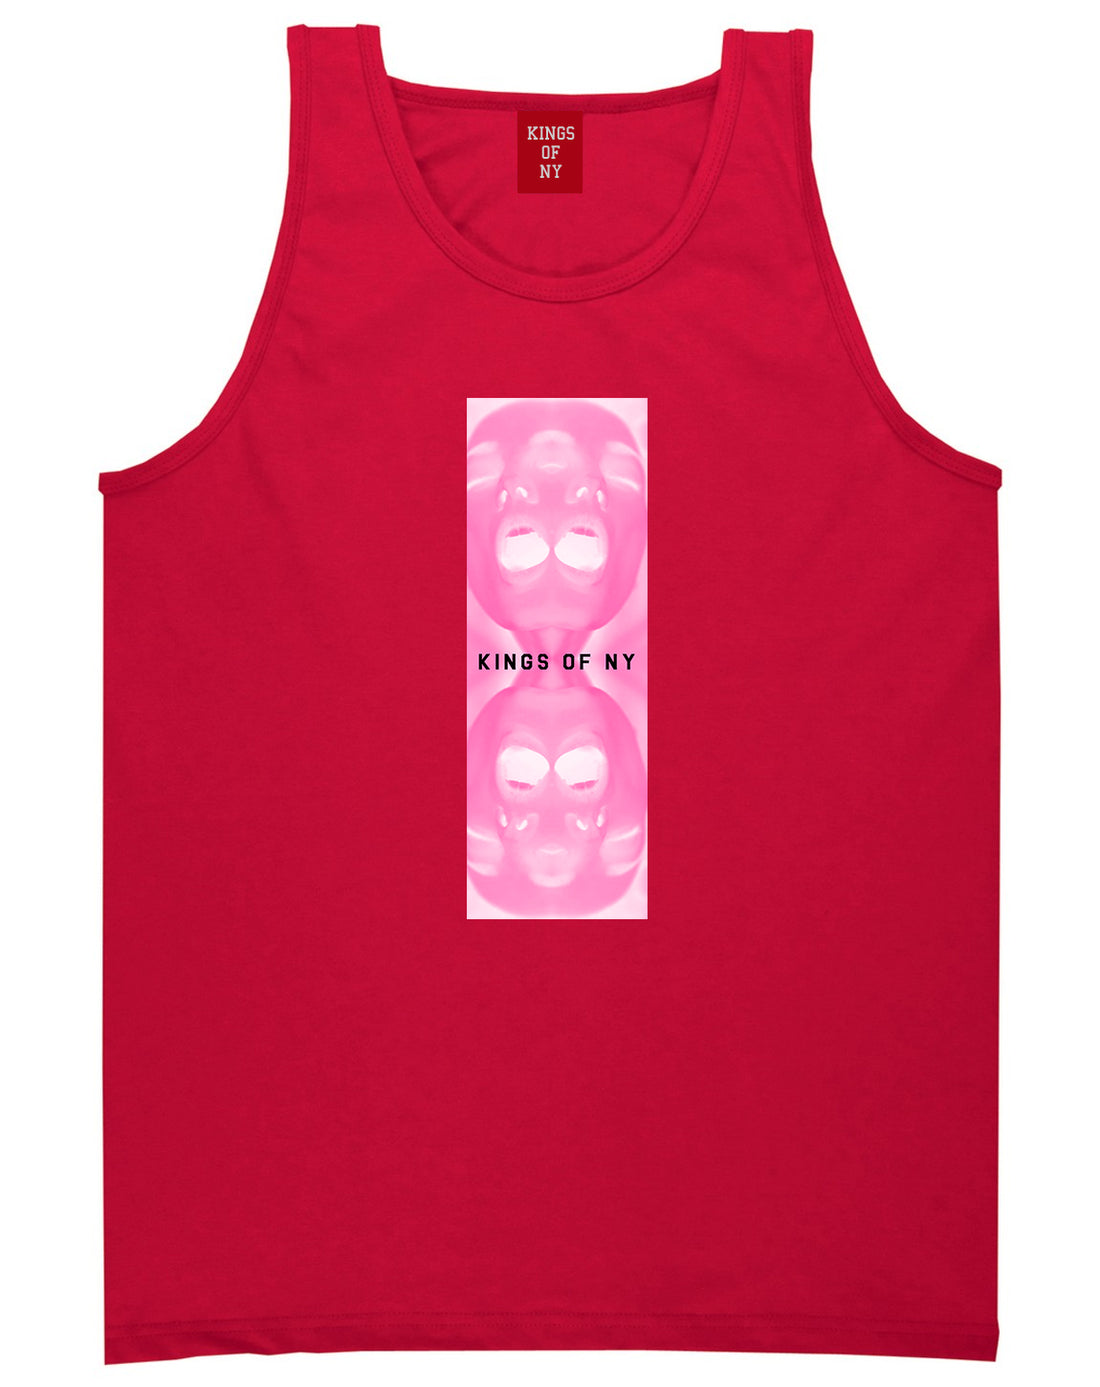 After Dark Mens Tank Top Shirt Red by Kings Of NY